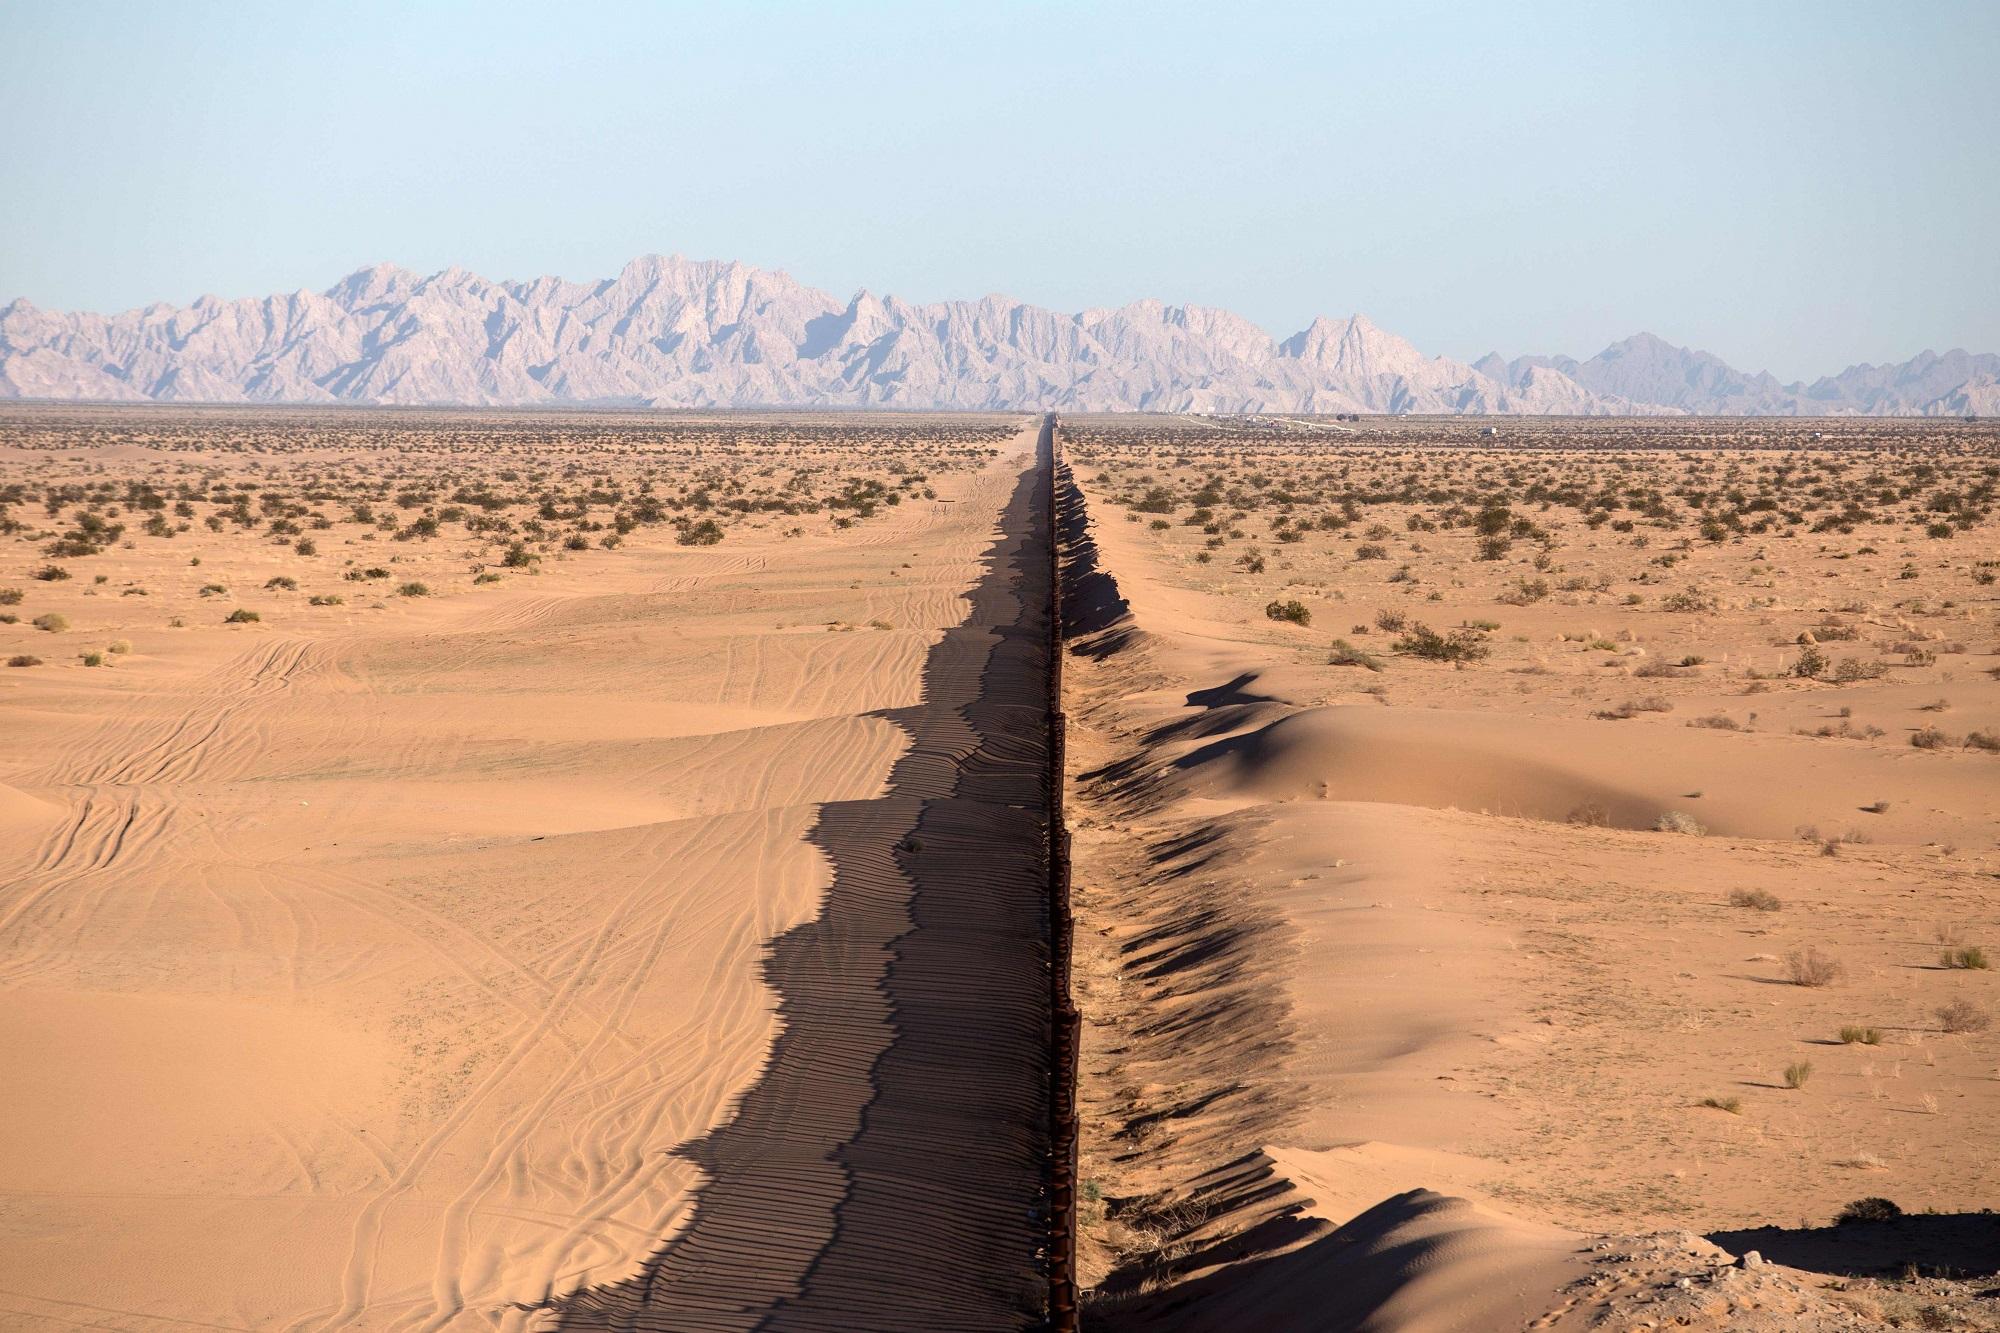 This file photo taken on February 15, 2017 shows a section of the US/Mexico border fence seen at San Luis Río Colorado, Sonora state, in northwestern Mexico. With debate raging in the United States and Mexico over President Donald Trump